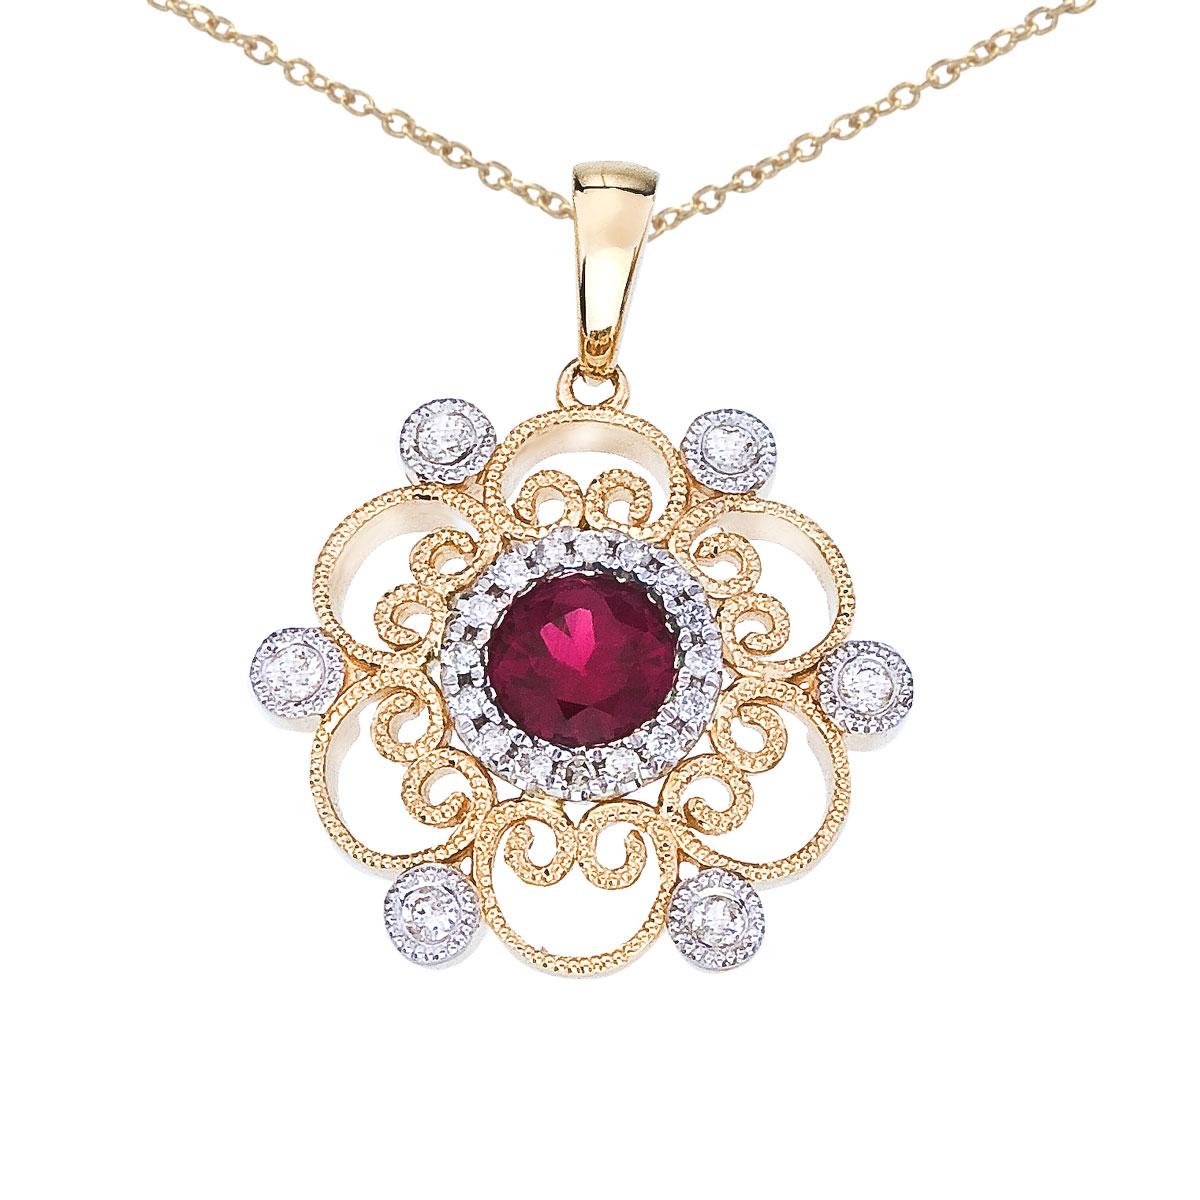 Sophisticated 14k two-toned gold pendant containing a vibrant 5 mm round ruby and .13 ct diamond accents.